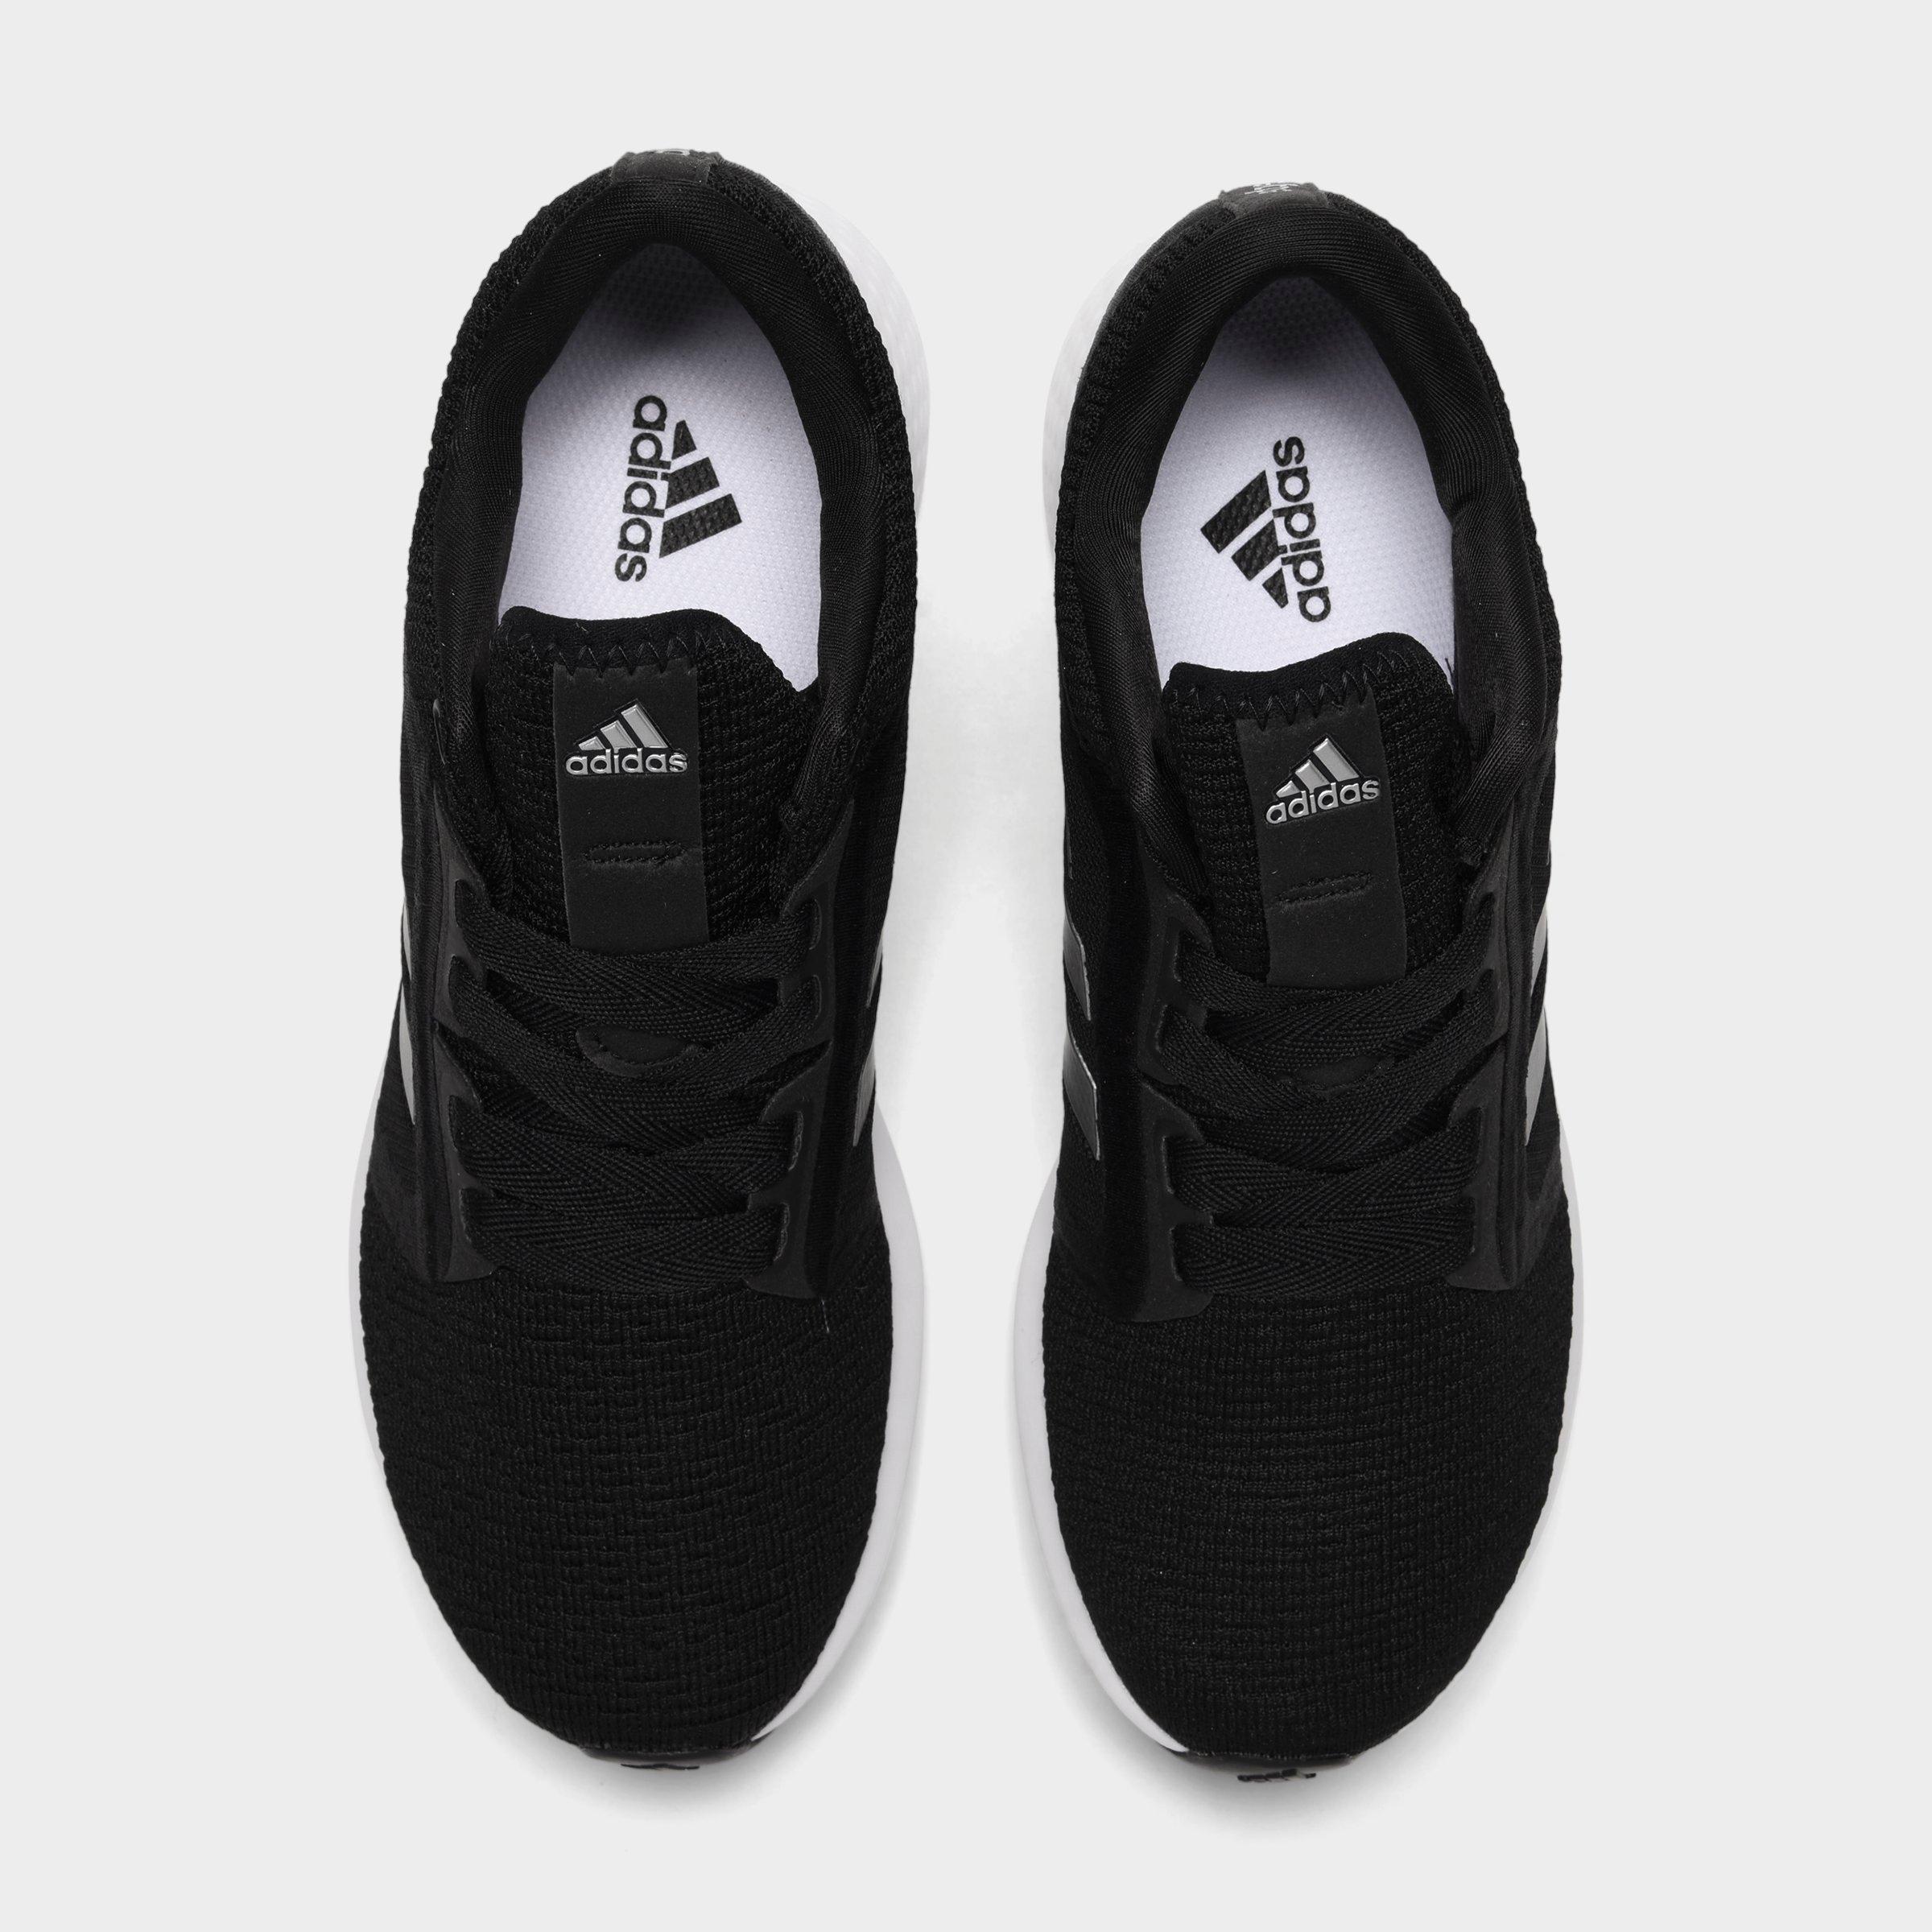 adidas women's luxe shoes